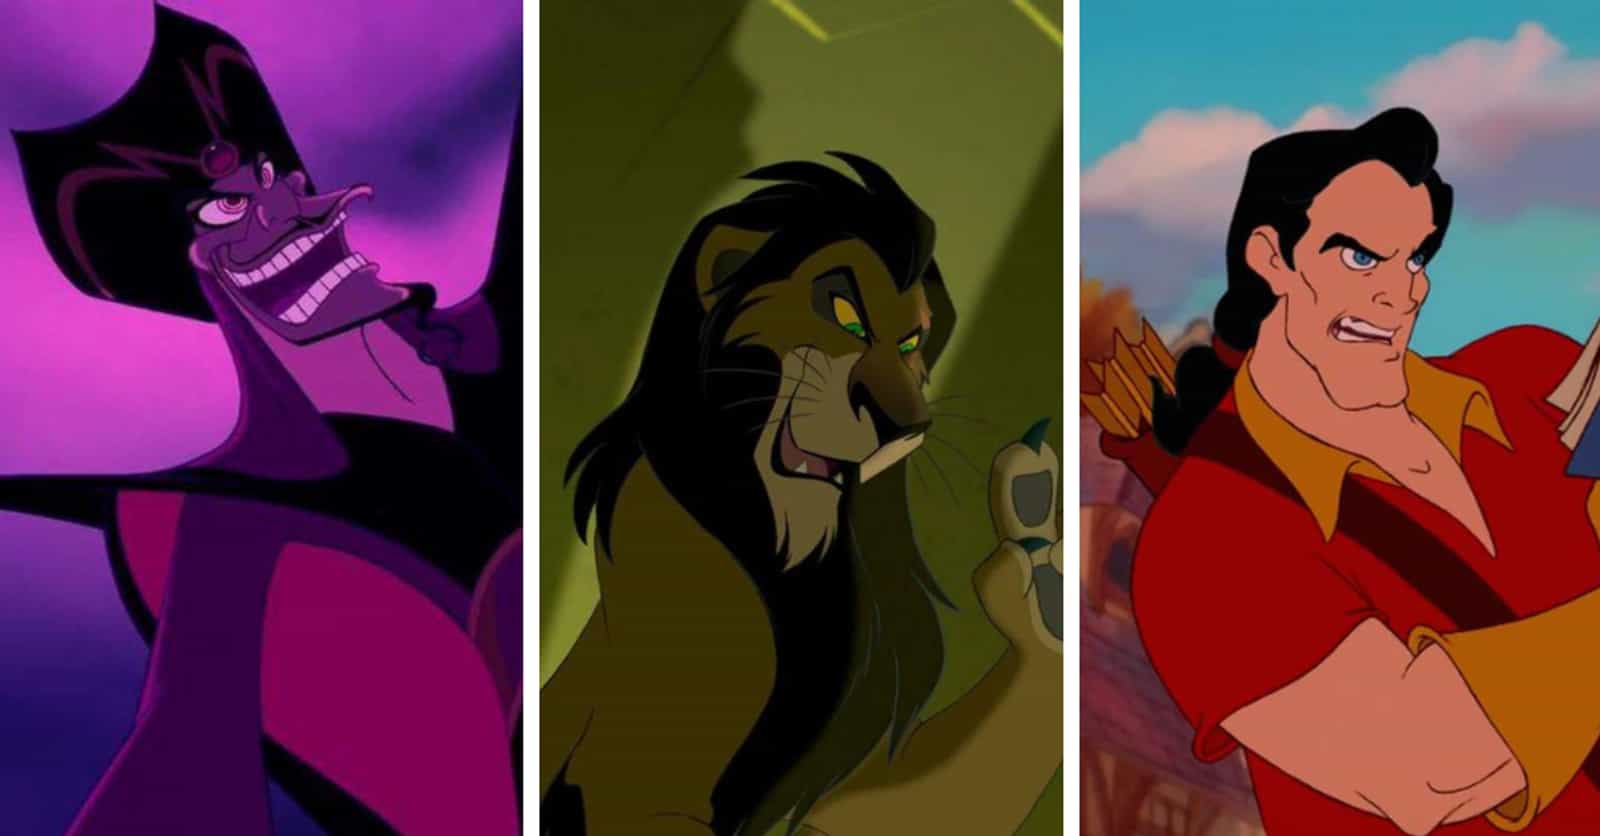 Behind-The-Scenes Stories About Disney Villains